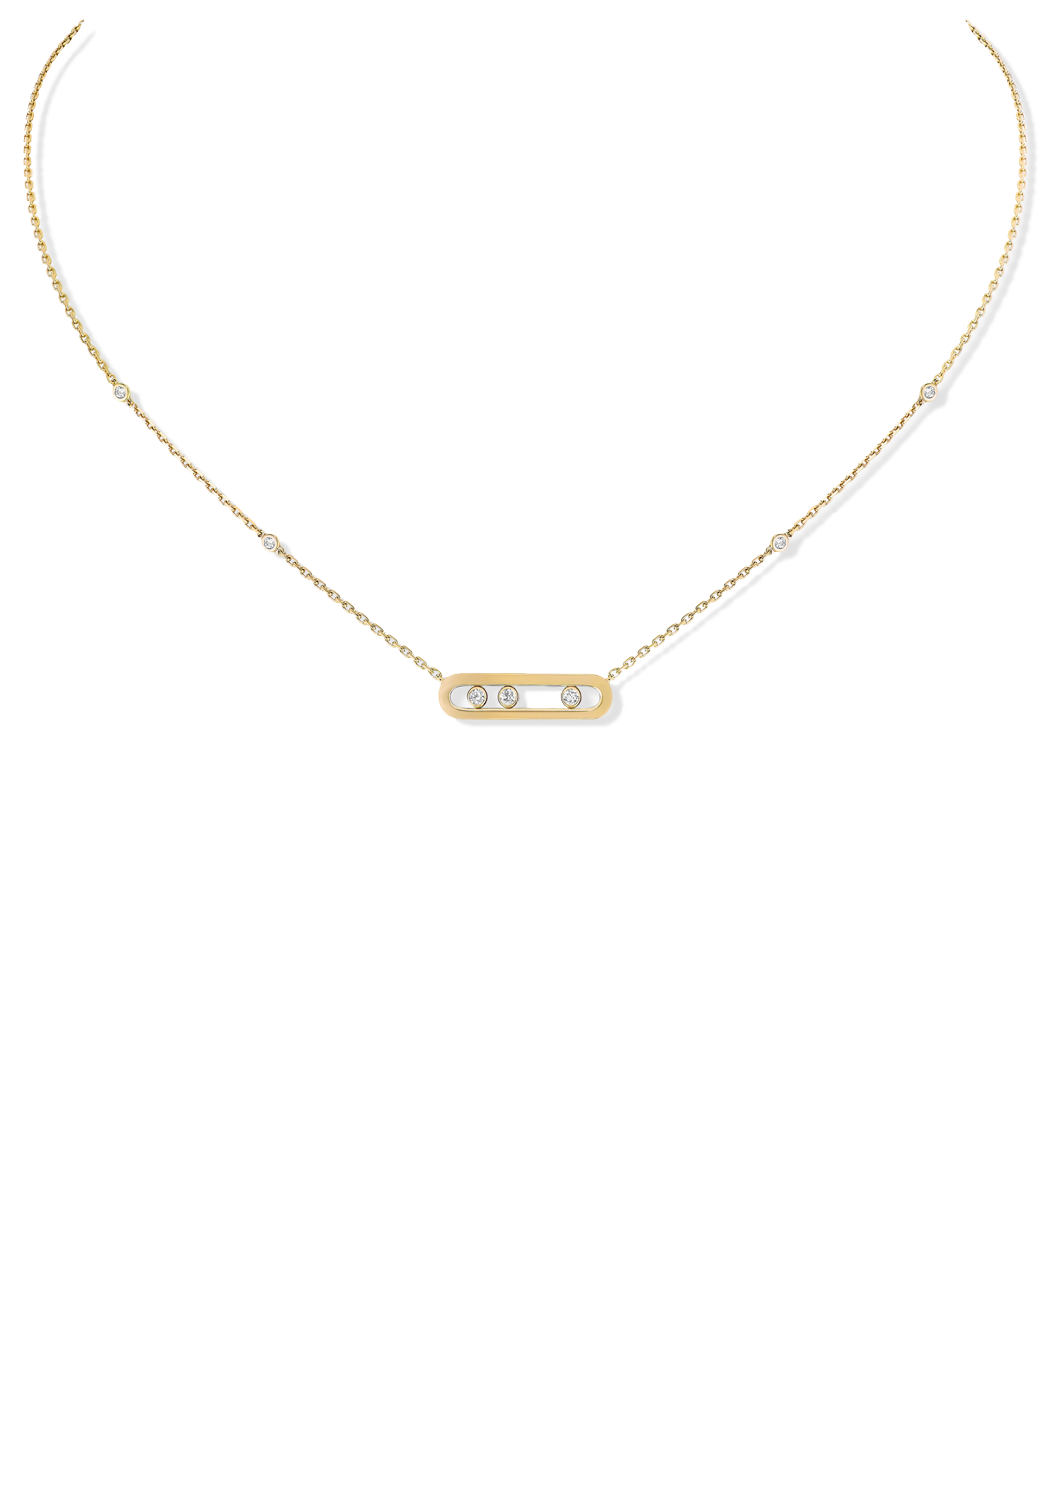 Messika Baby Move 18K Rose Gold Diamond Necklace | Ref. 04323-RG | OsterJewelers.com
